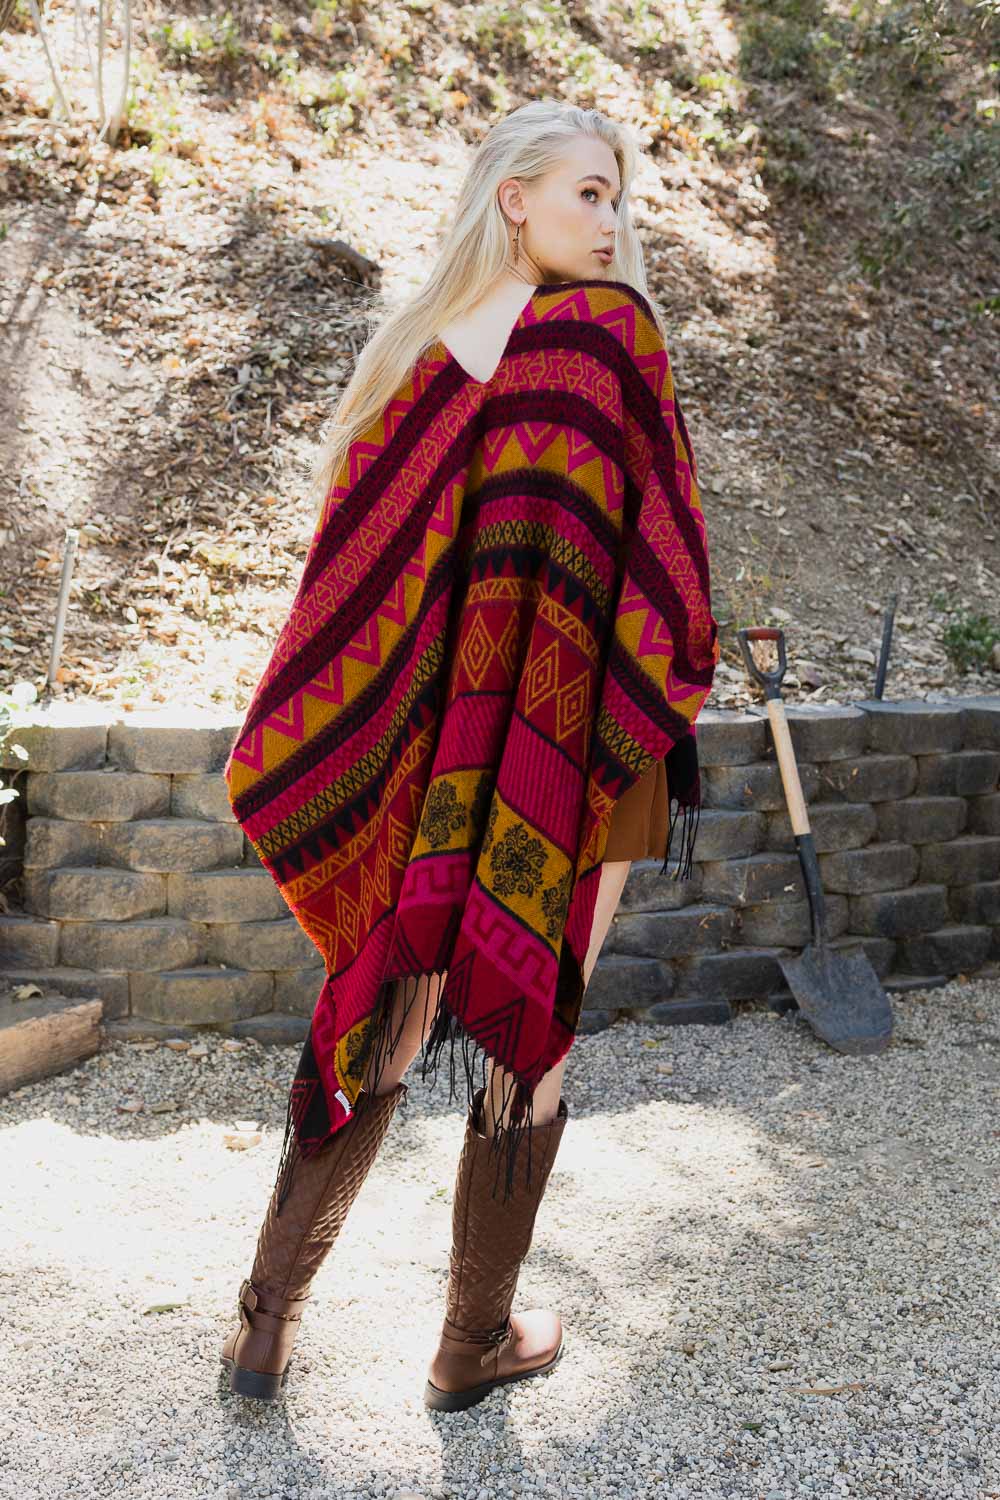 Voeding naast Zuidoost Aztec Inspired Go West Poncho – Thank you